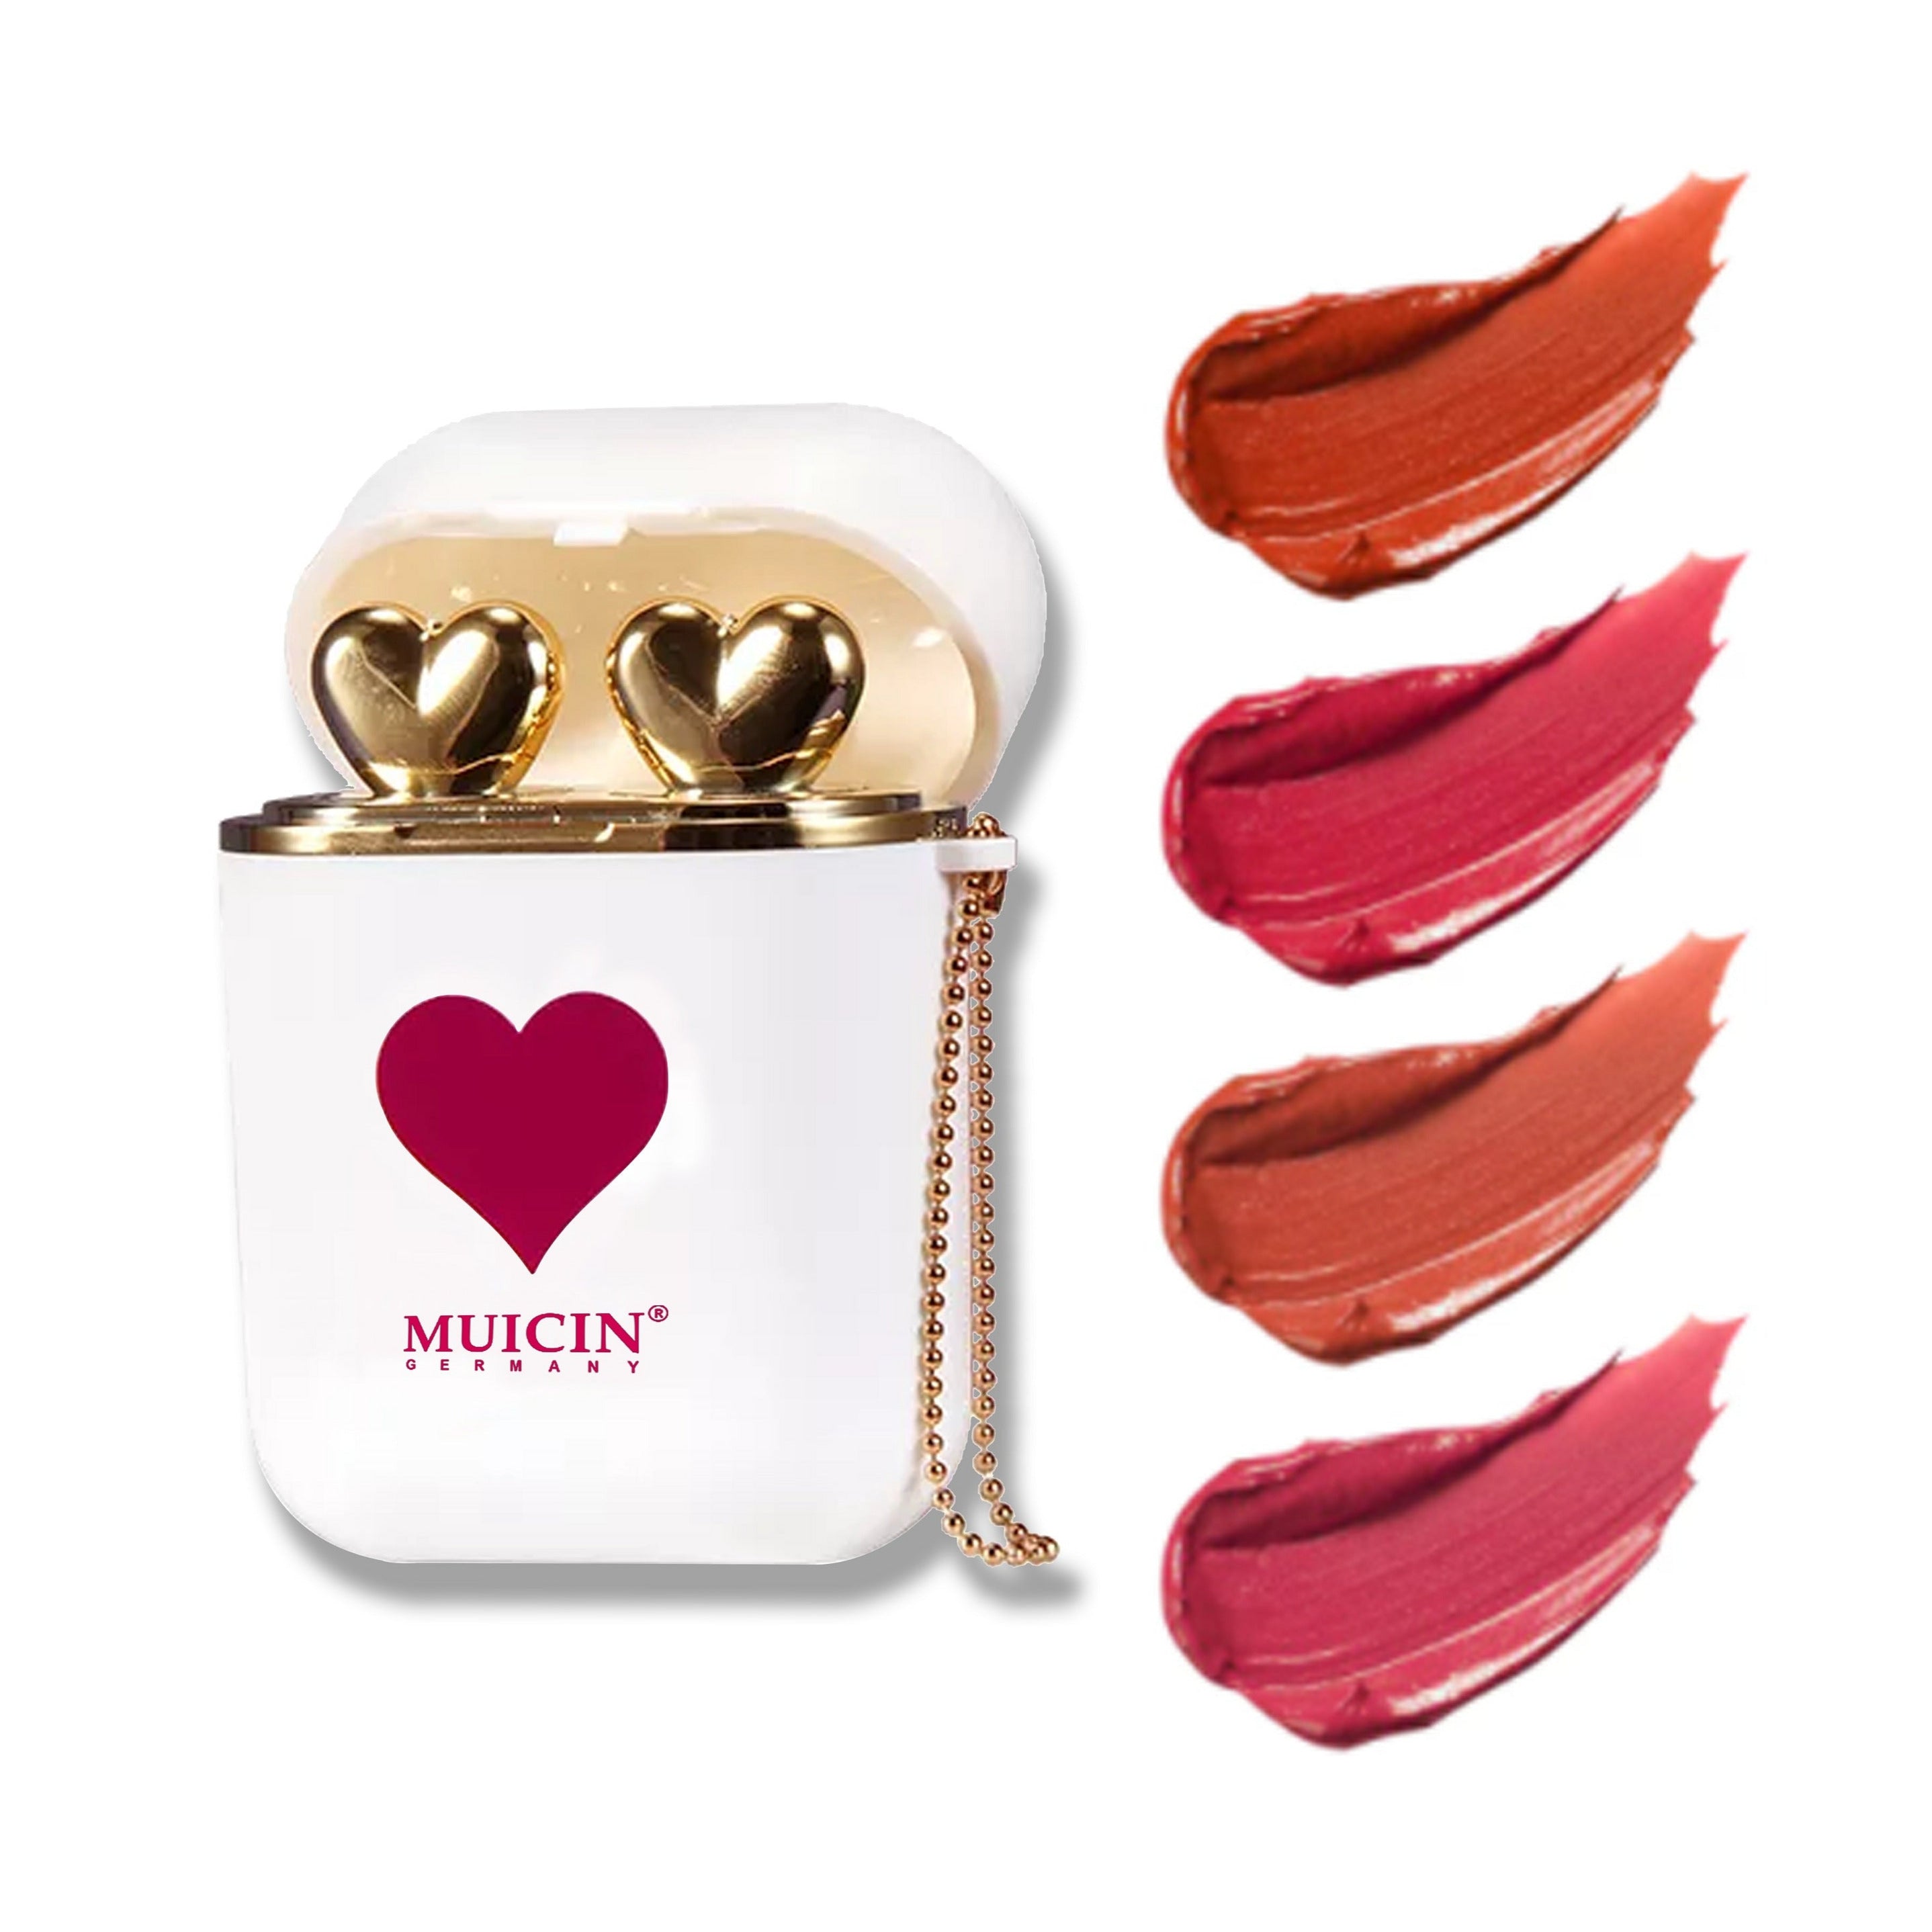 HEART JELLY SHINE LIPSTICK PODS - LUSCIOUS SHEER TINTS